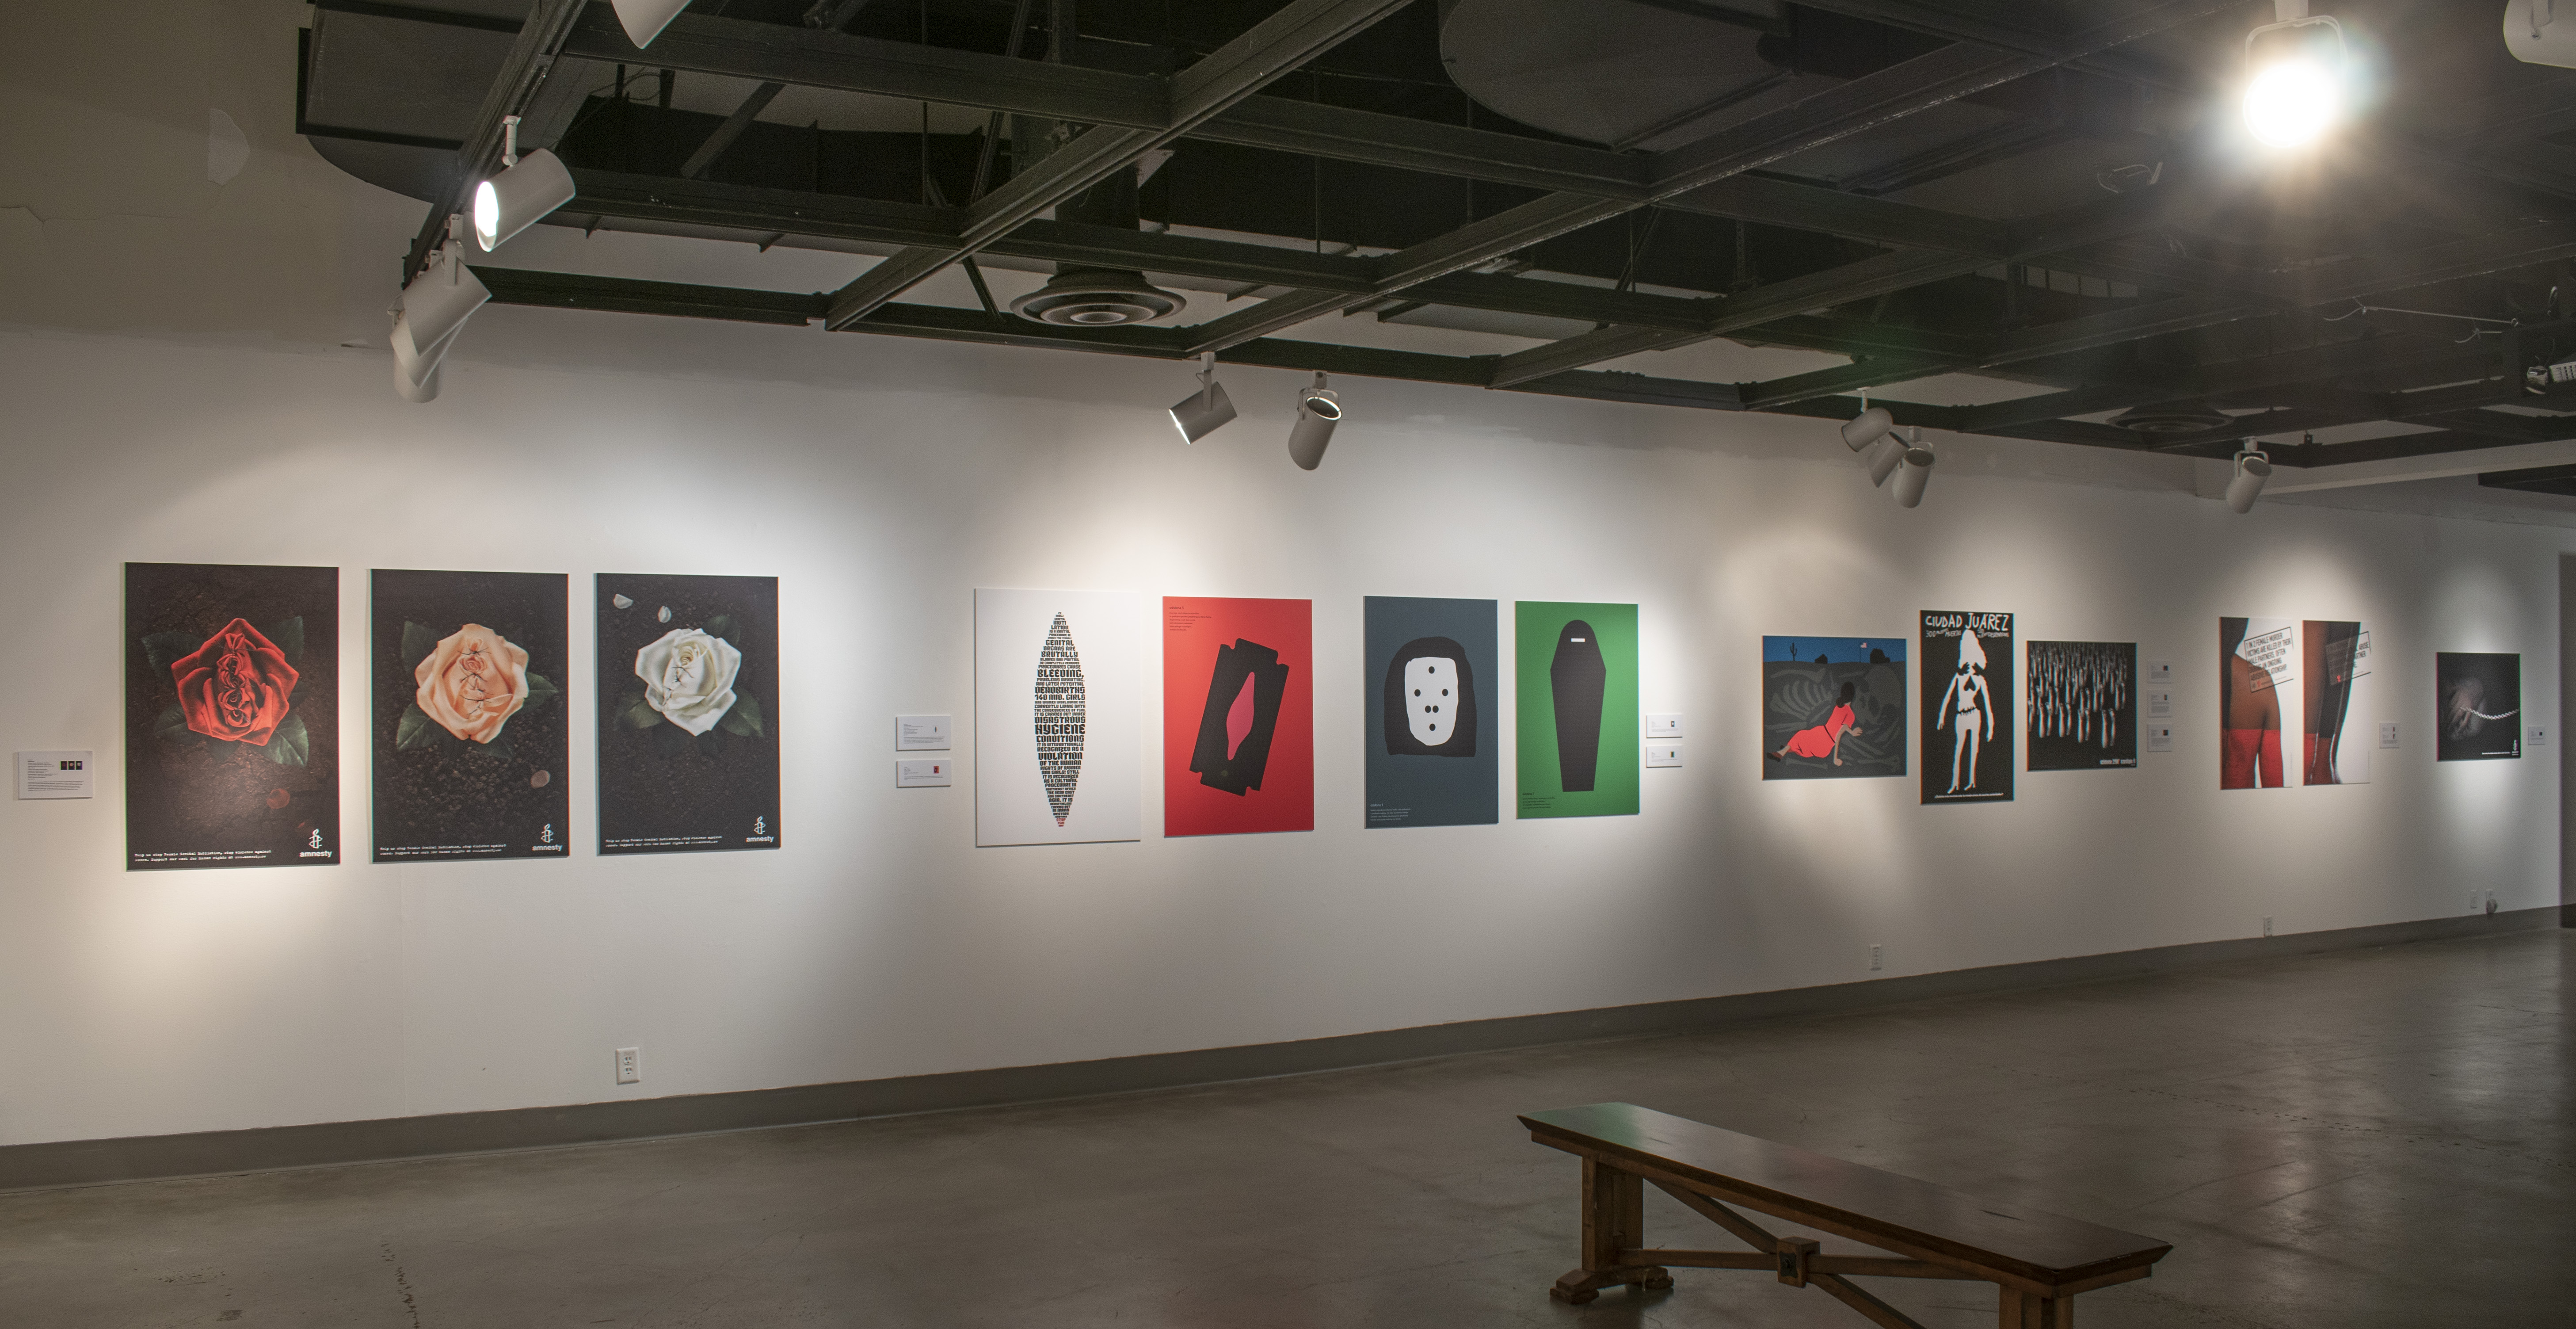 Installation View, Back Gallery, Women's Rights are Human Rights Exhibition, Sept 15, 2021 to Dec 1, 2021